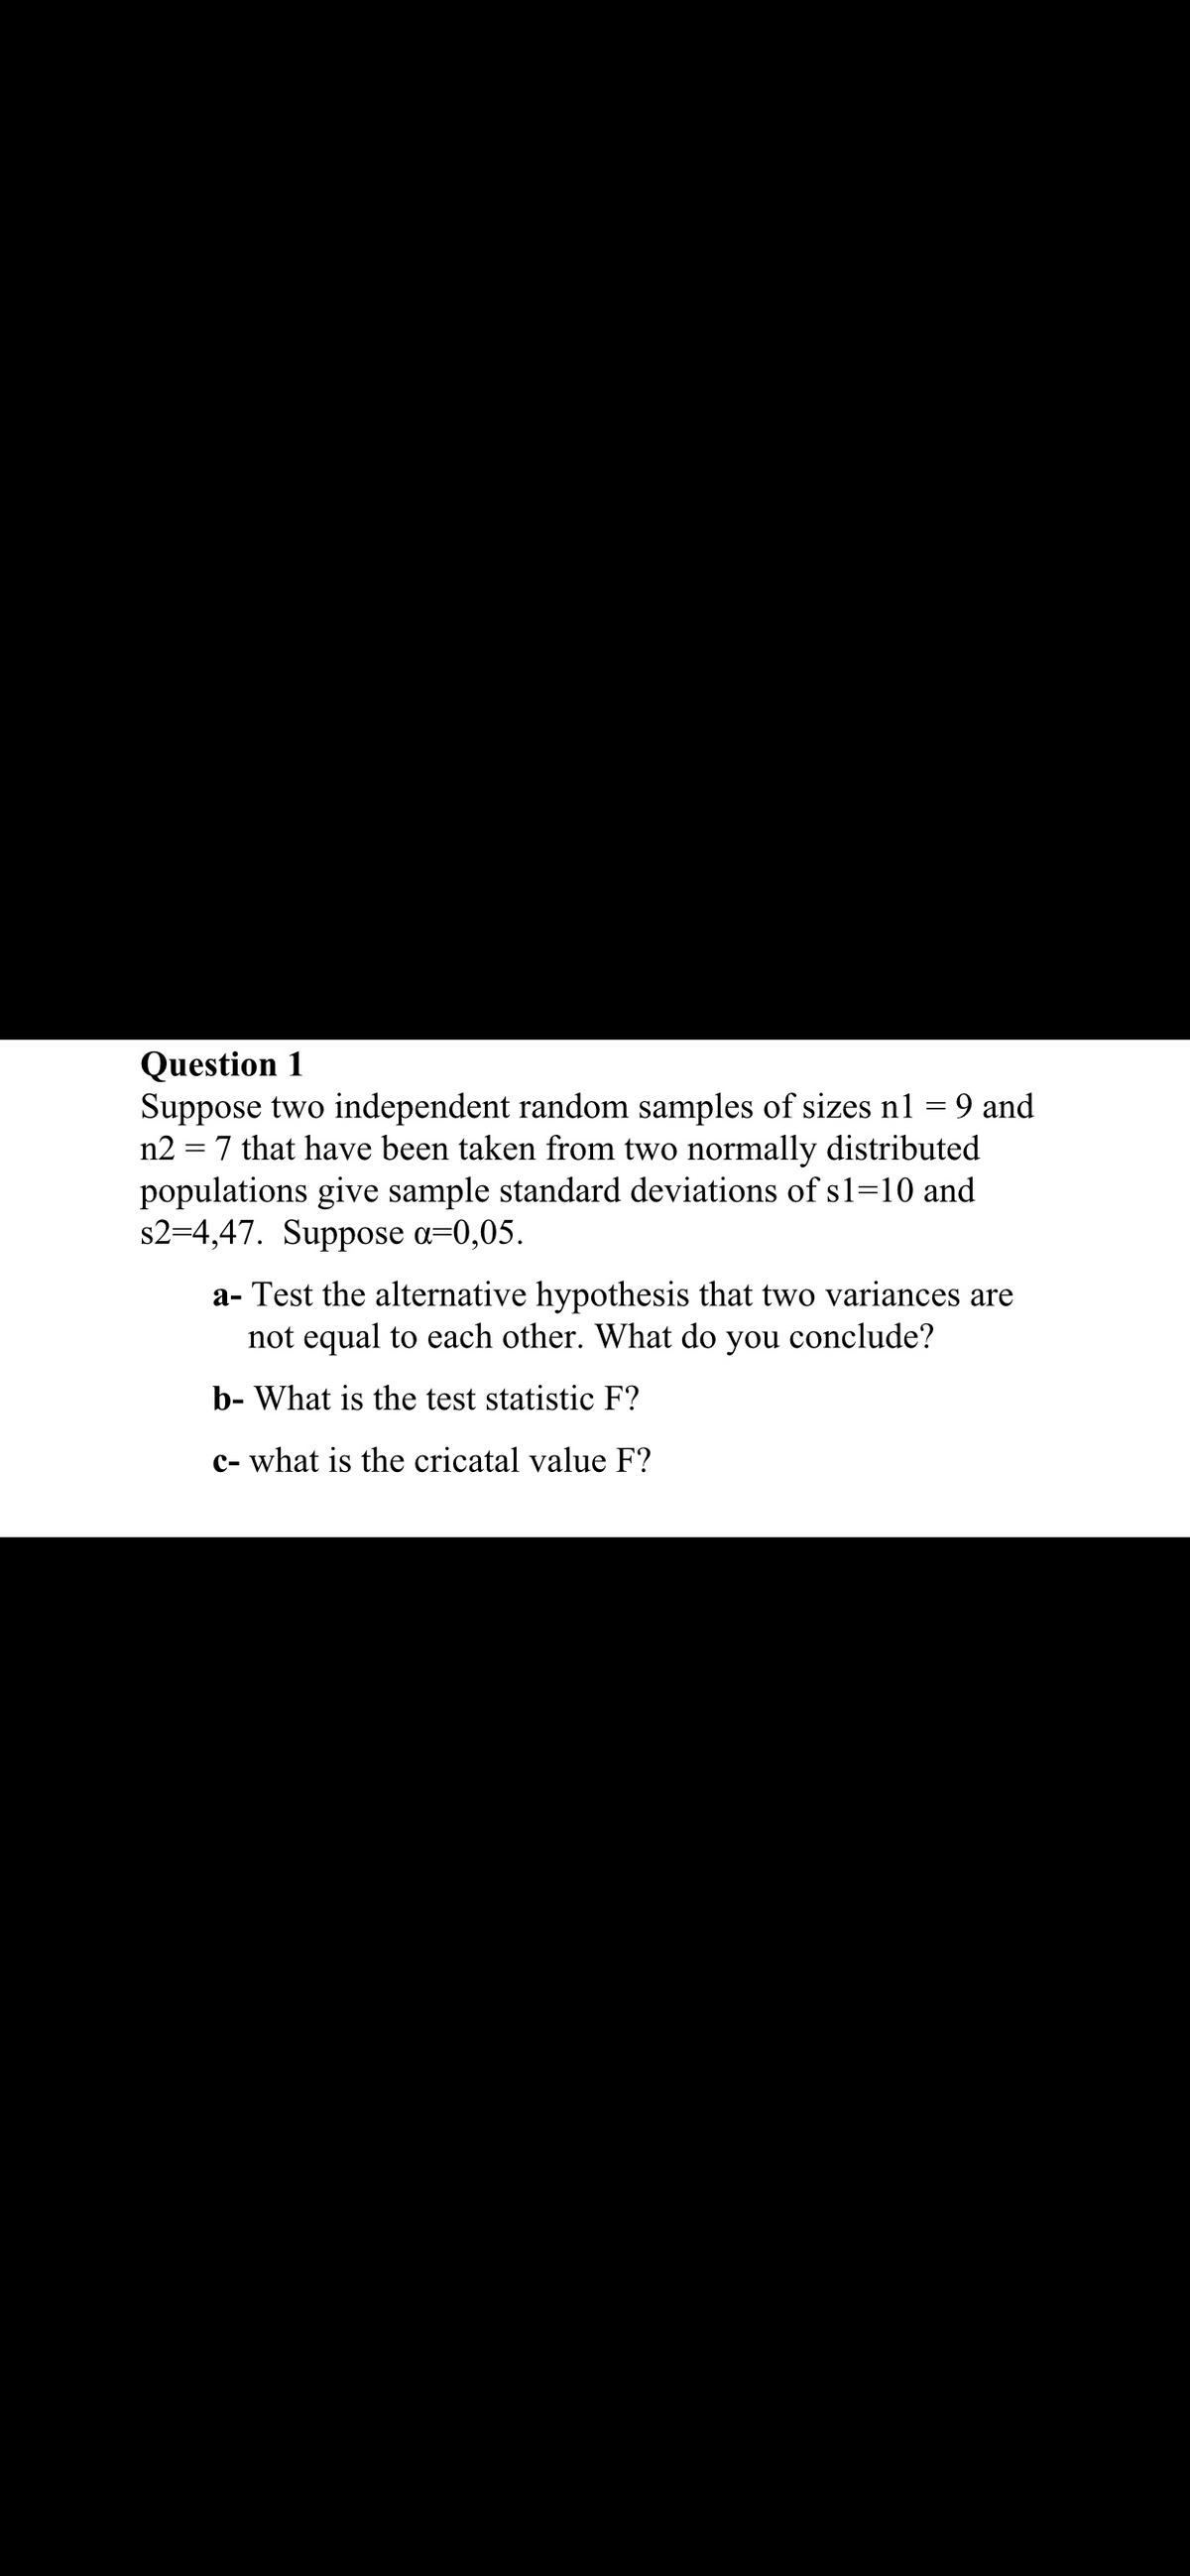 Question 1
Suppose two independent random samples of sizes n1 = 9 and
n2 = 7 that have been taken from two normally distributed
populations give sample standard deviations of s1=10 and
s2=4,47. Suppose a=0,05.
a- Test the alternative hypothesis that two variances are
not equal to each other. What do you conclude?
b- What is the test statistic F?
c- what is the cricatal value F?